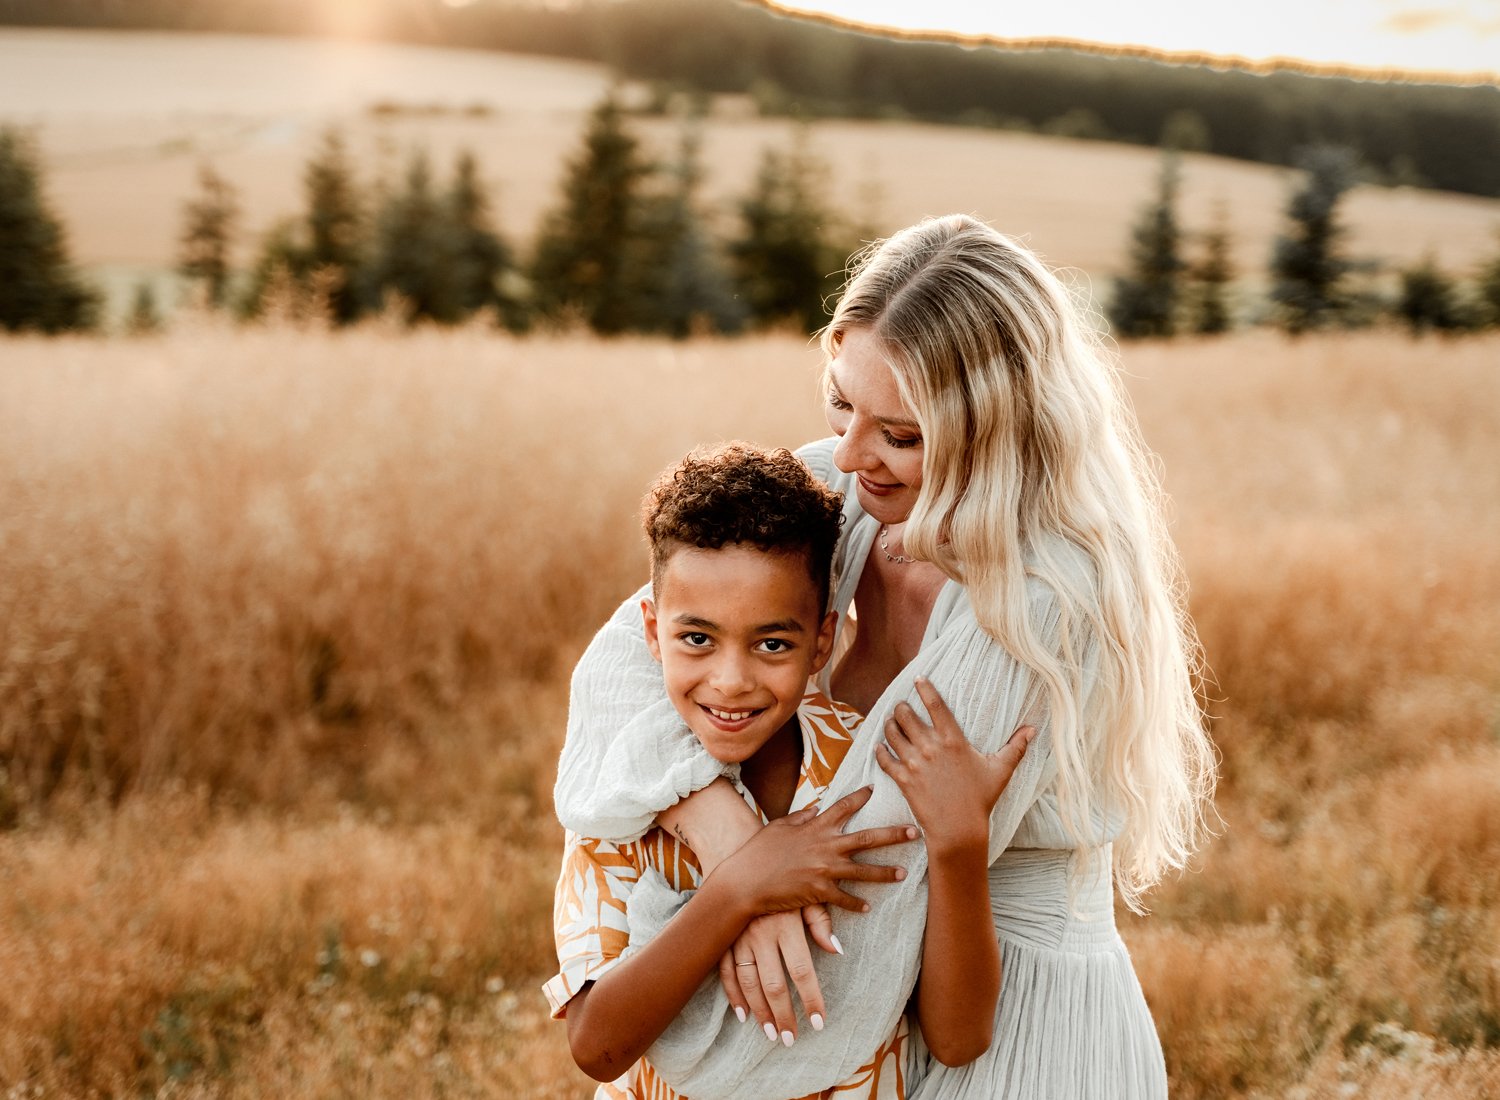 emotive-storytelling-summer-session-of-young-mixed-family-with-young-kids-at-sunset-in-german-country-side-in-ramstein-kmc-by-sarah-havens (2).jpg